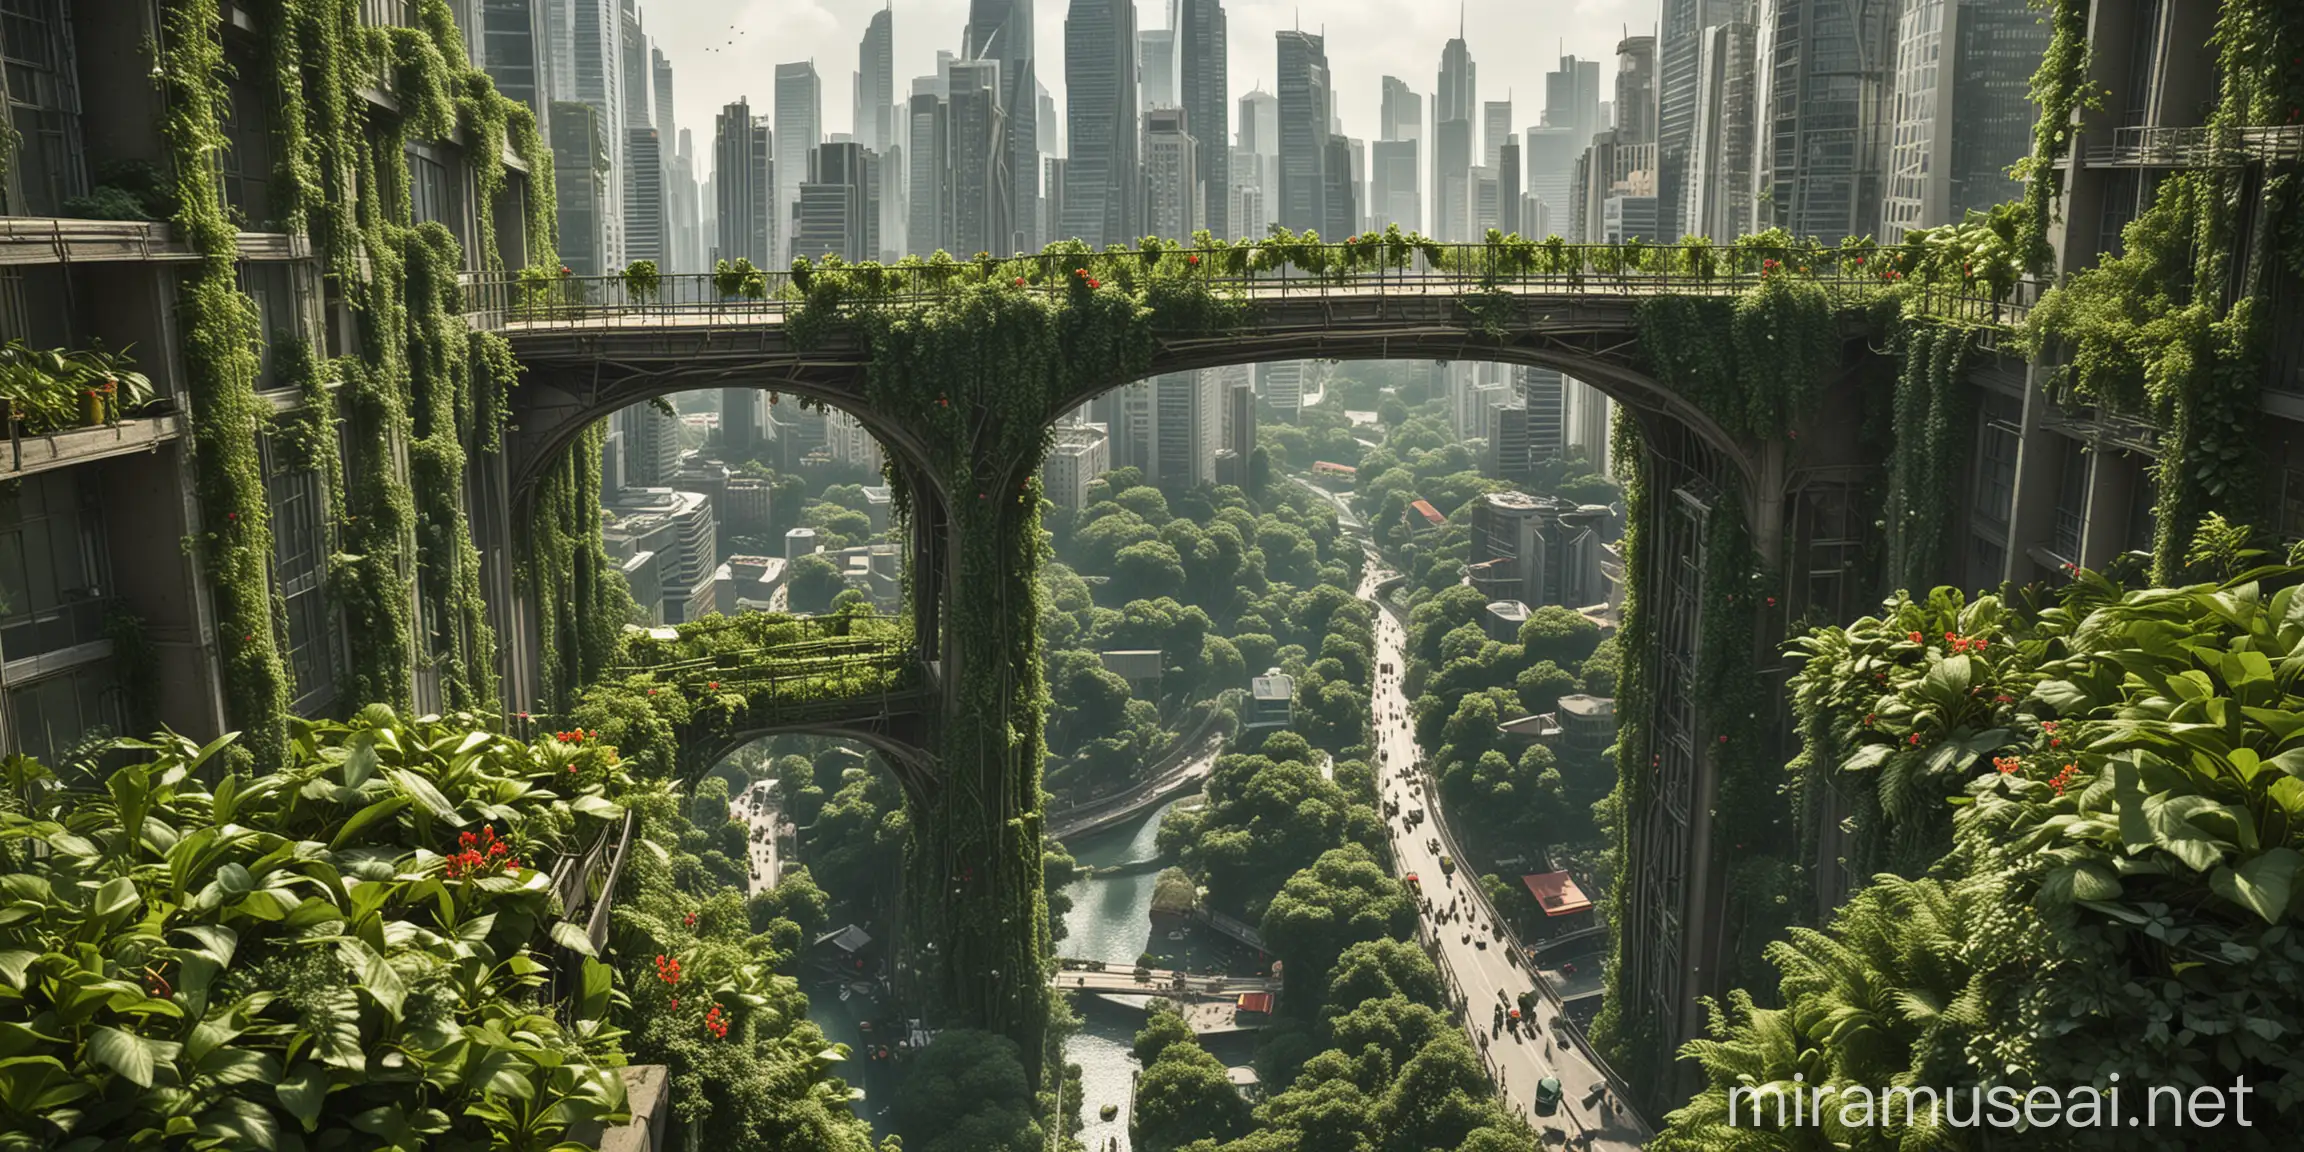 Skyscrapers with Lush Terrace Gardens and Bridges Covered in Climbing Plants